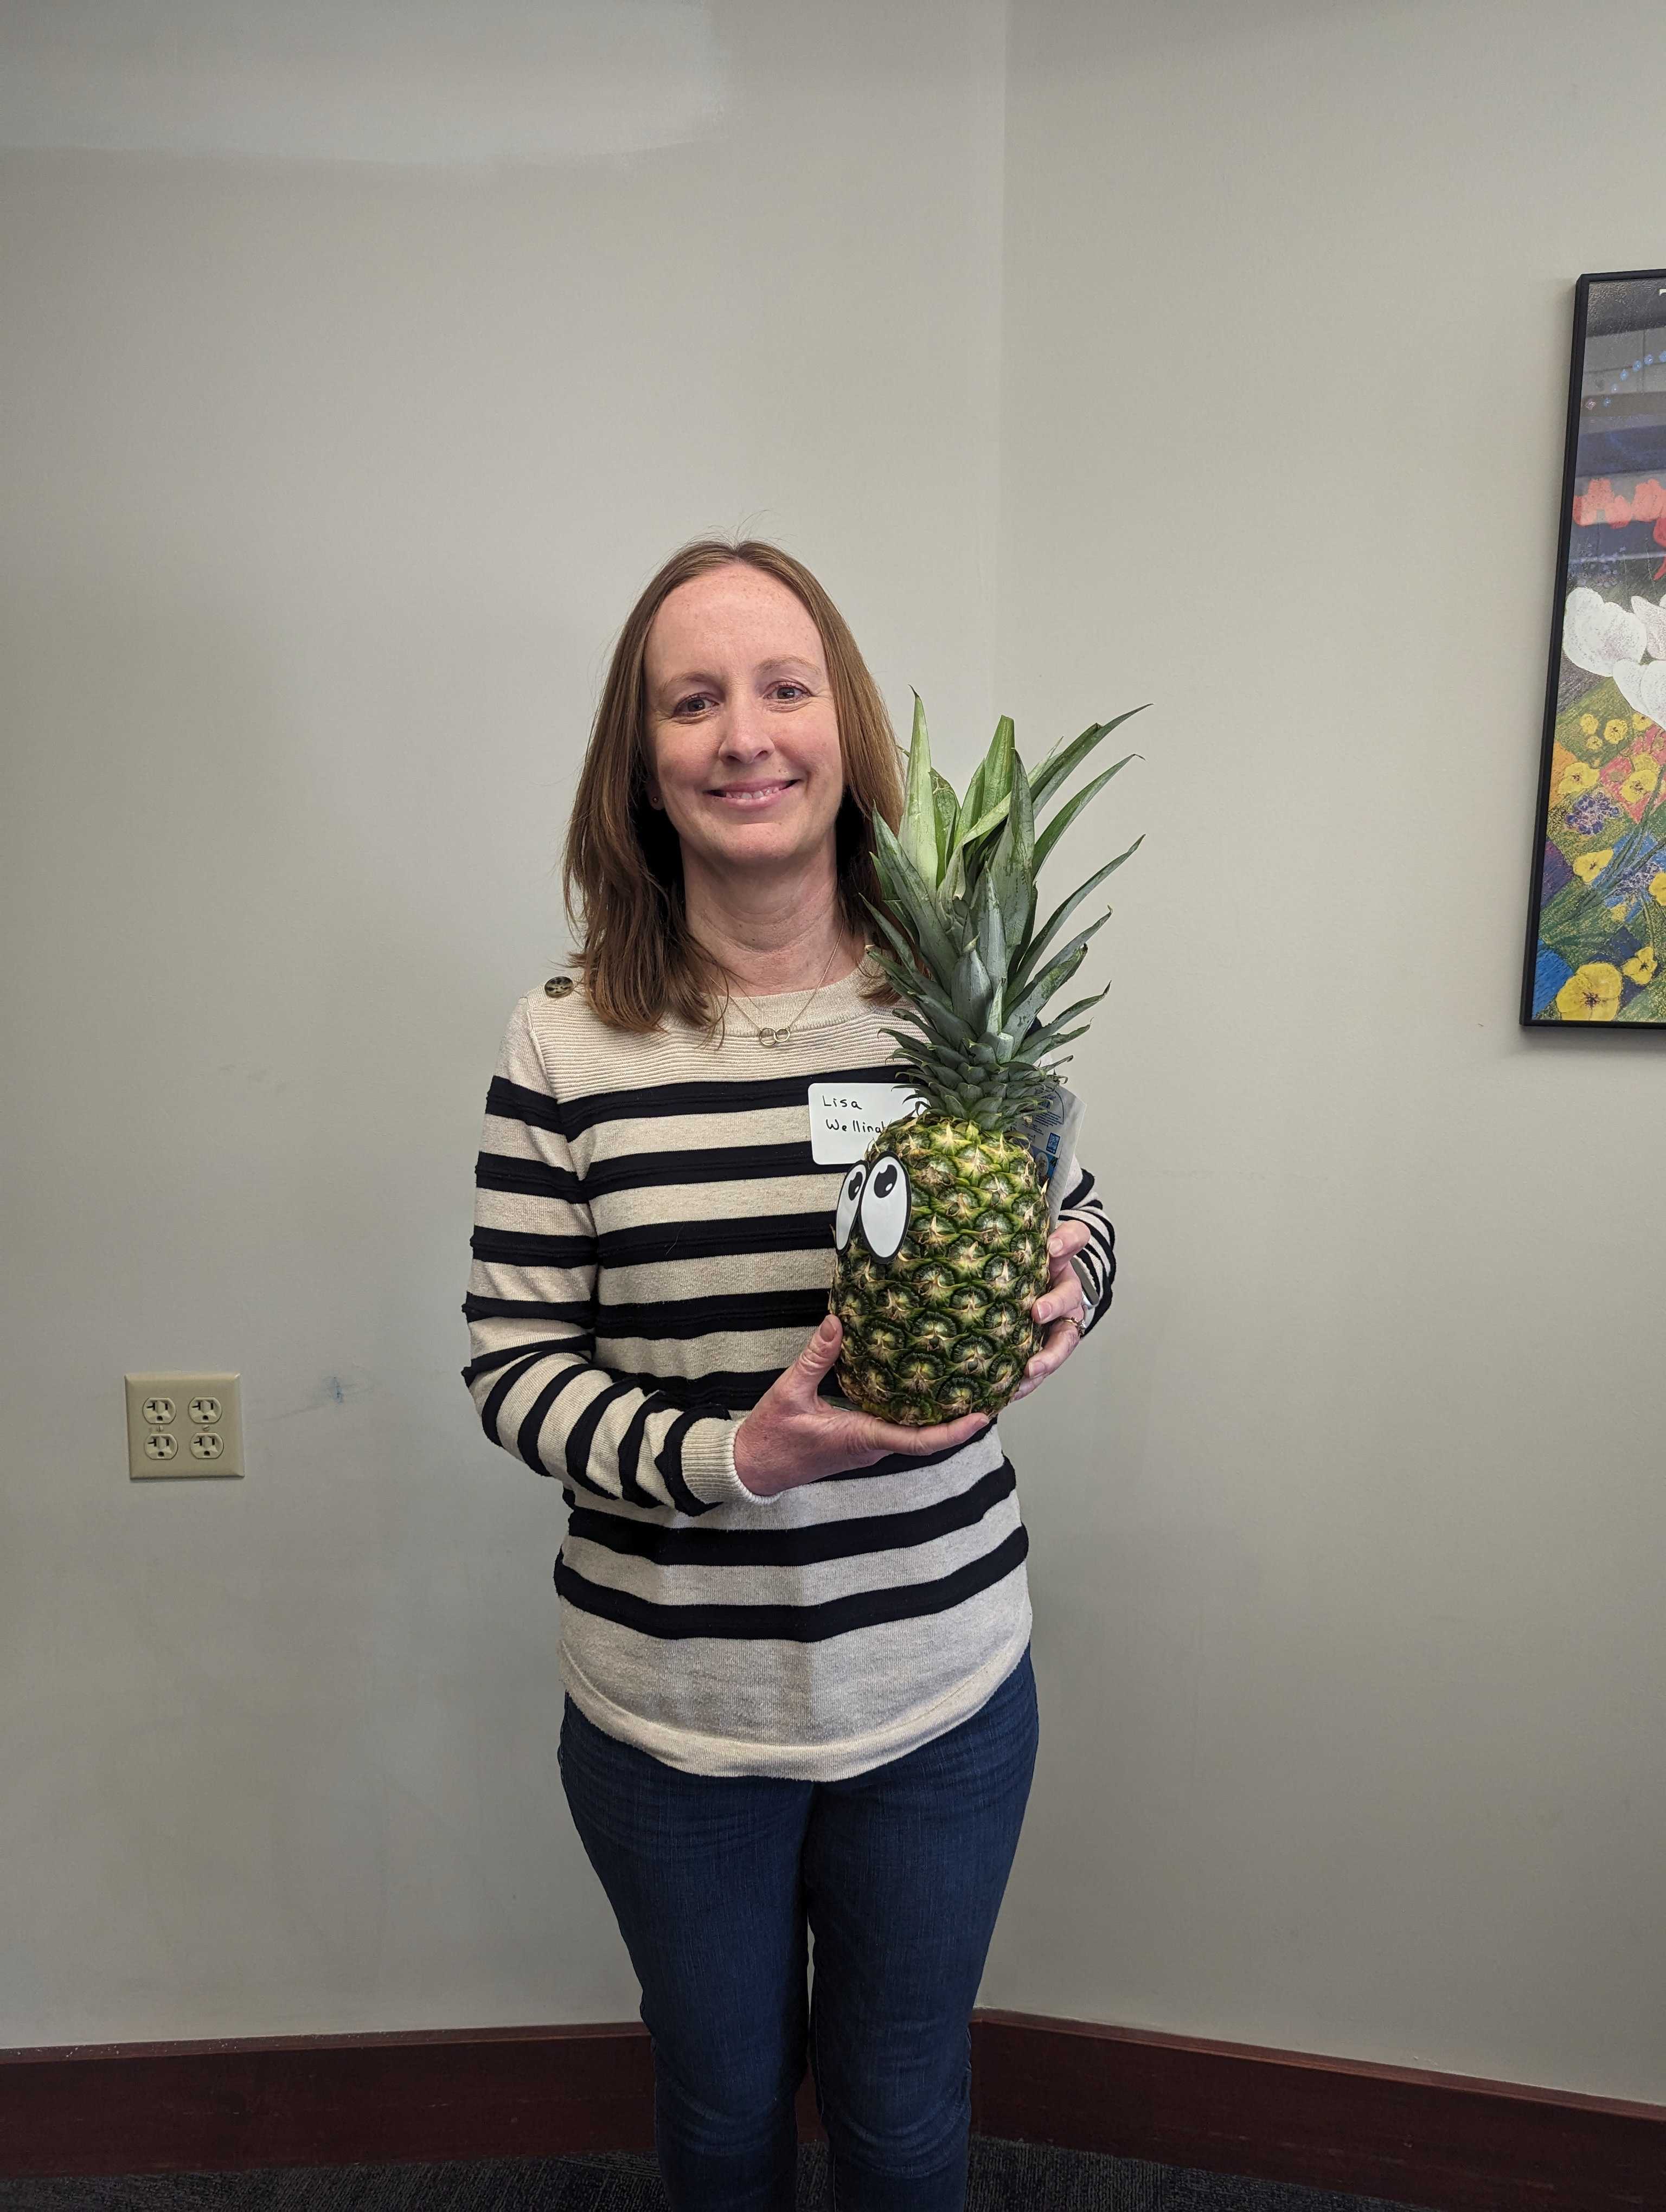 Faculty member Lisa Wellinghoff poses with a pineapple to signify graduation from ATLS.